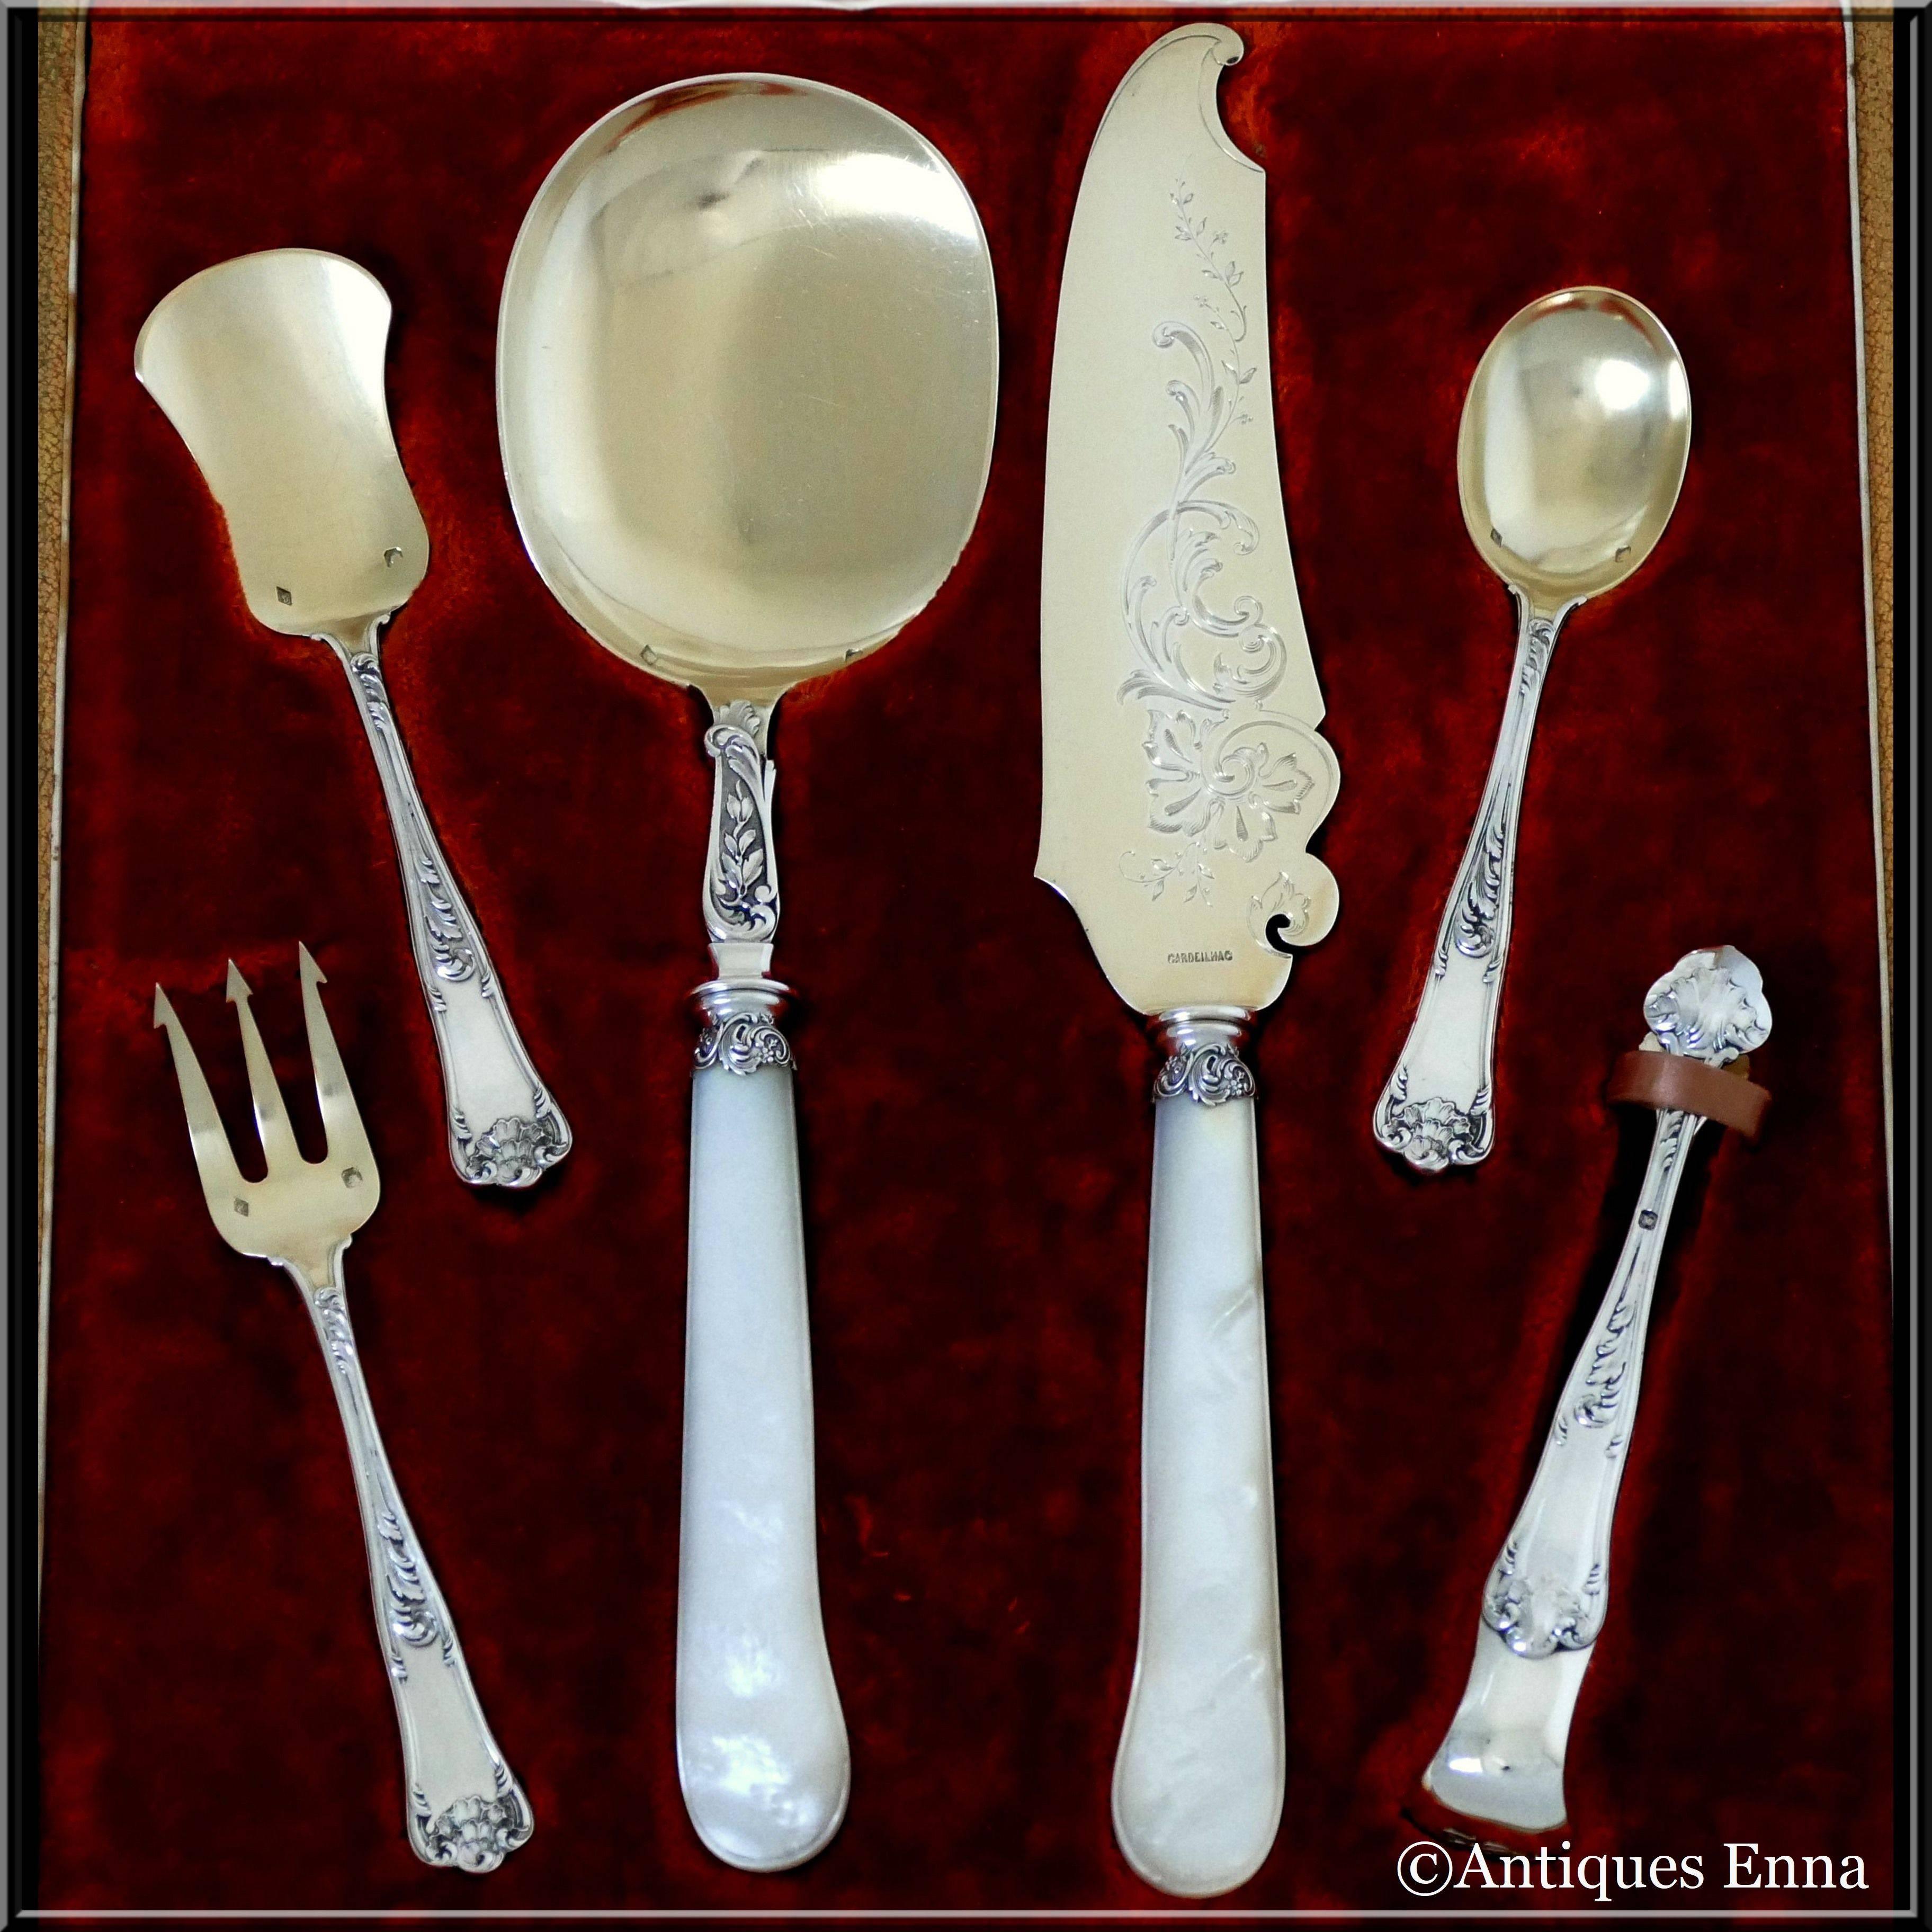 A set of truly exceptional quality, for the richness of its decoration, its form and sculpting. The set includes an ice cream set two pieces and a dessert set four pieces. It is extremely rare to find a service as complete, probably a special order.